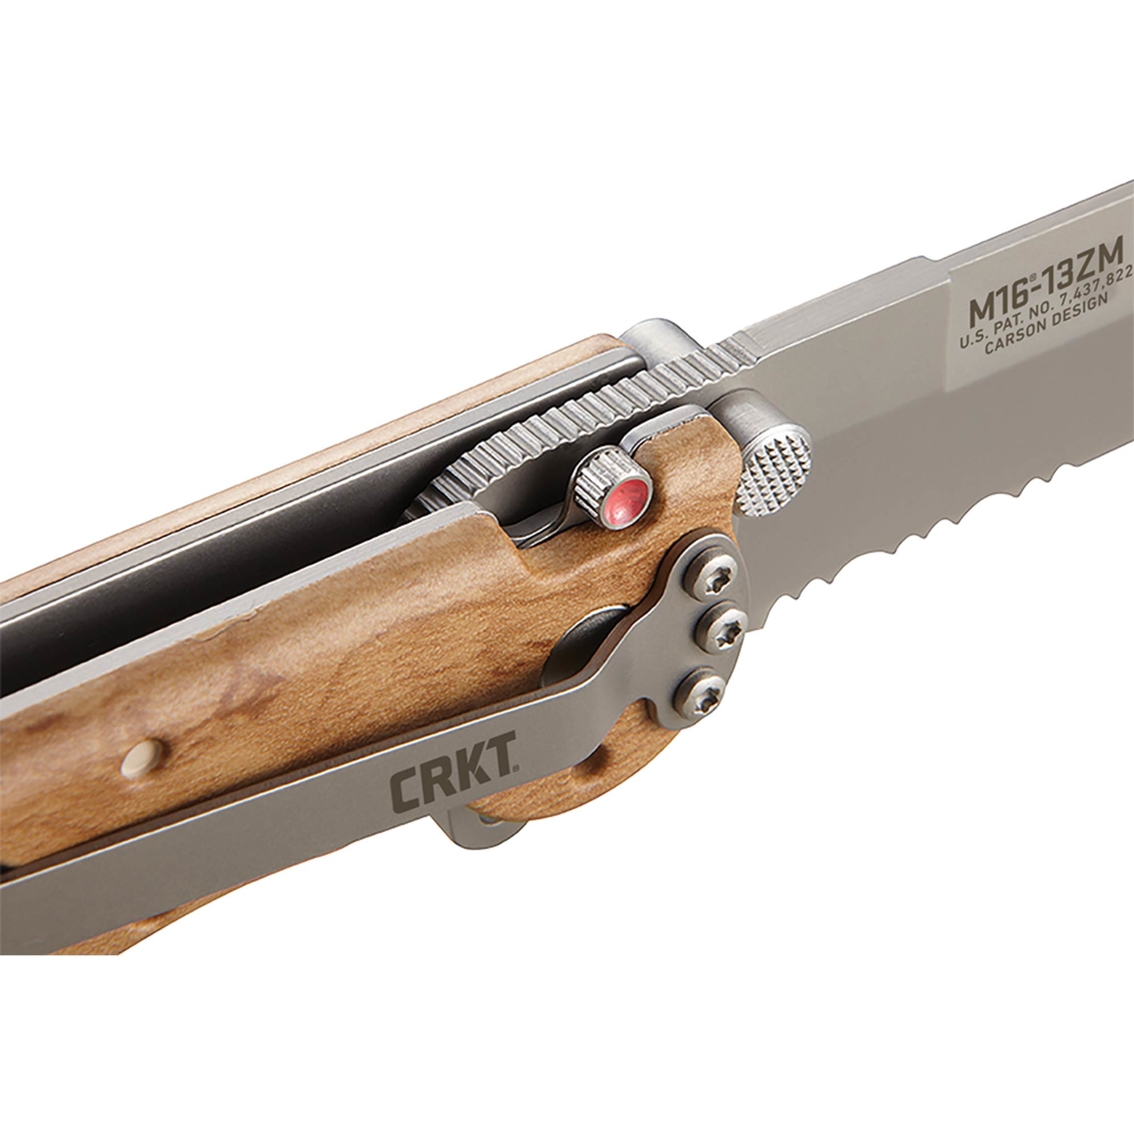 Columbia River Knife & Tool Carson M16-13ZM Desert Tactical Folding Knife - Image 4 of 4